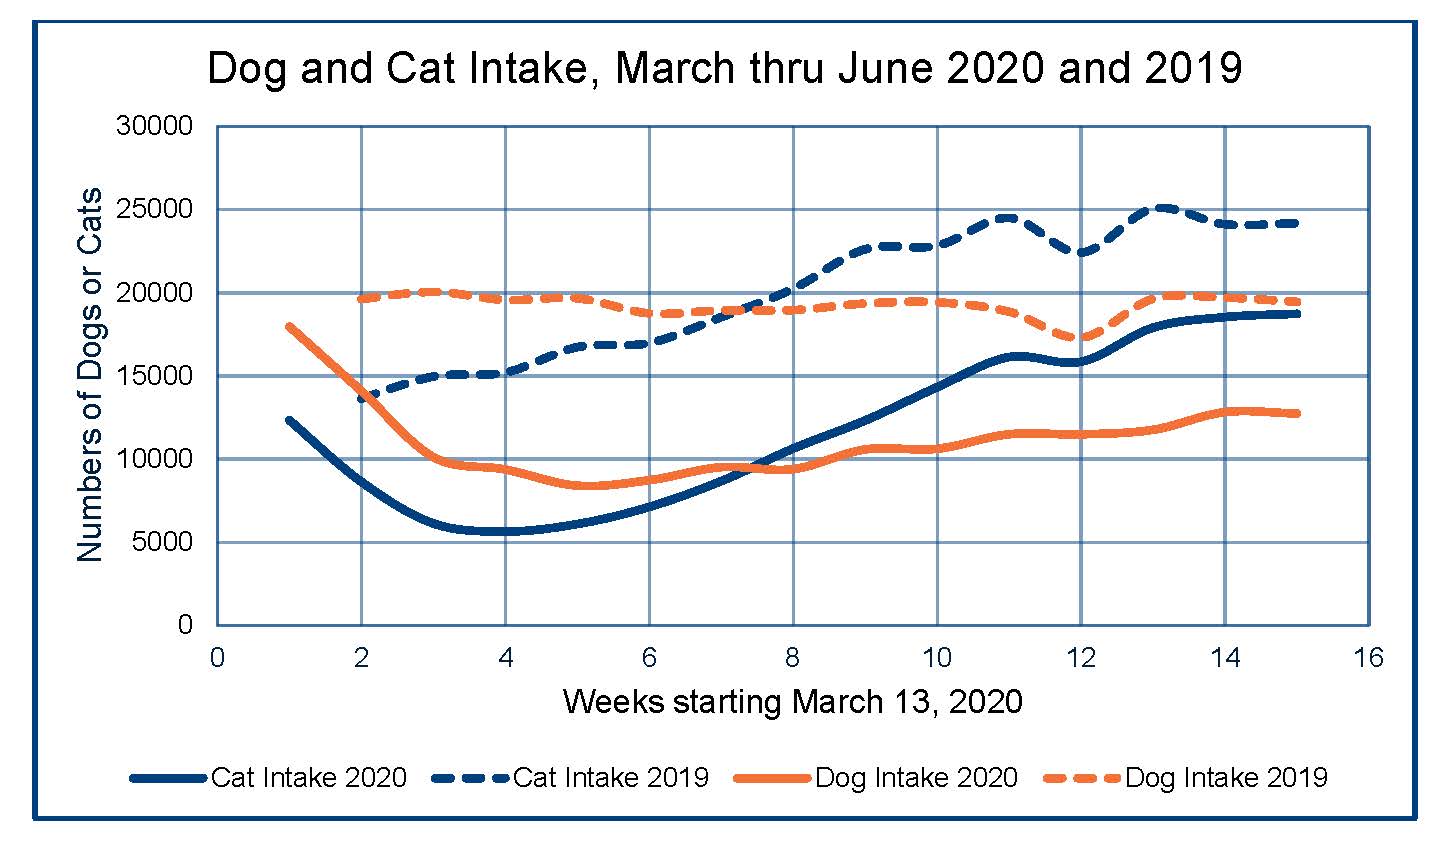 Dog and Cat Intake, March thru June 2020 and 2019